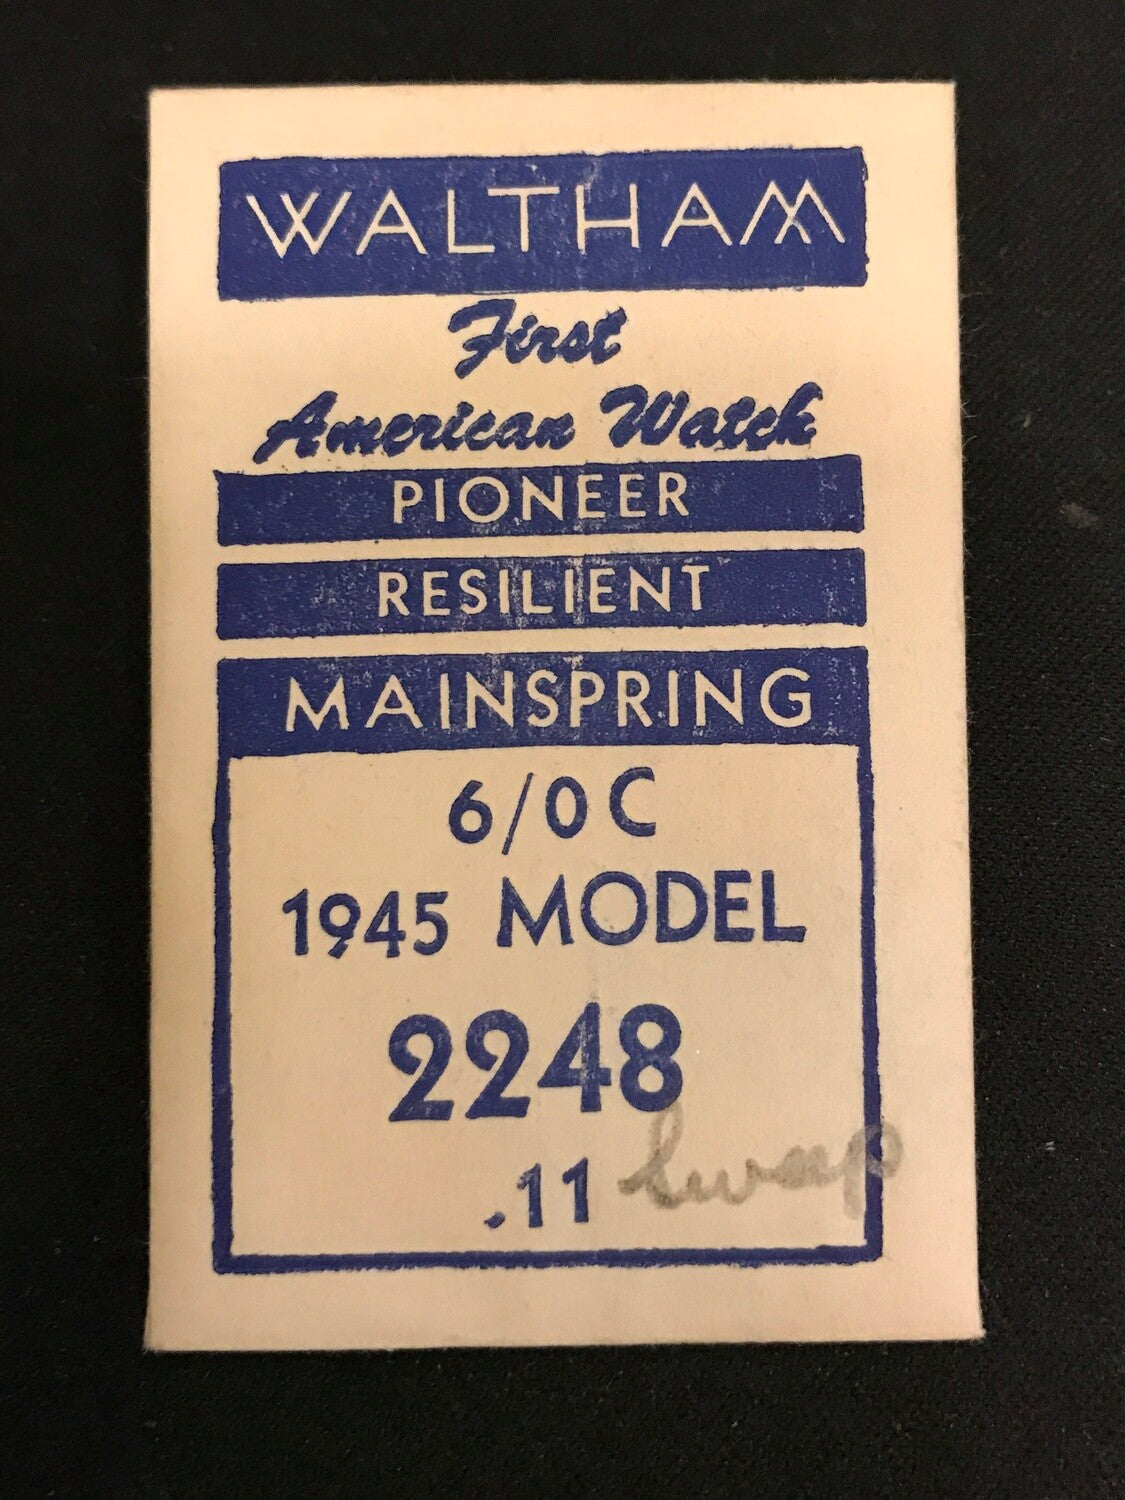 Waltham Factory Mainspring for 6/0 C 1945 Model No. 2248 - Steel